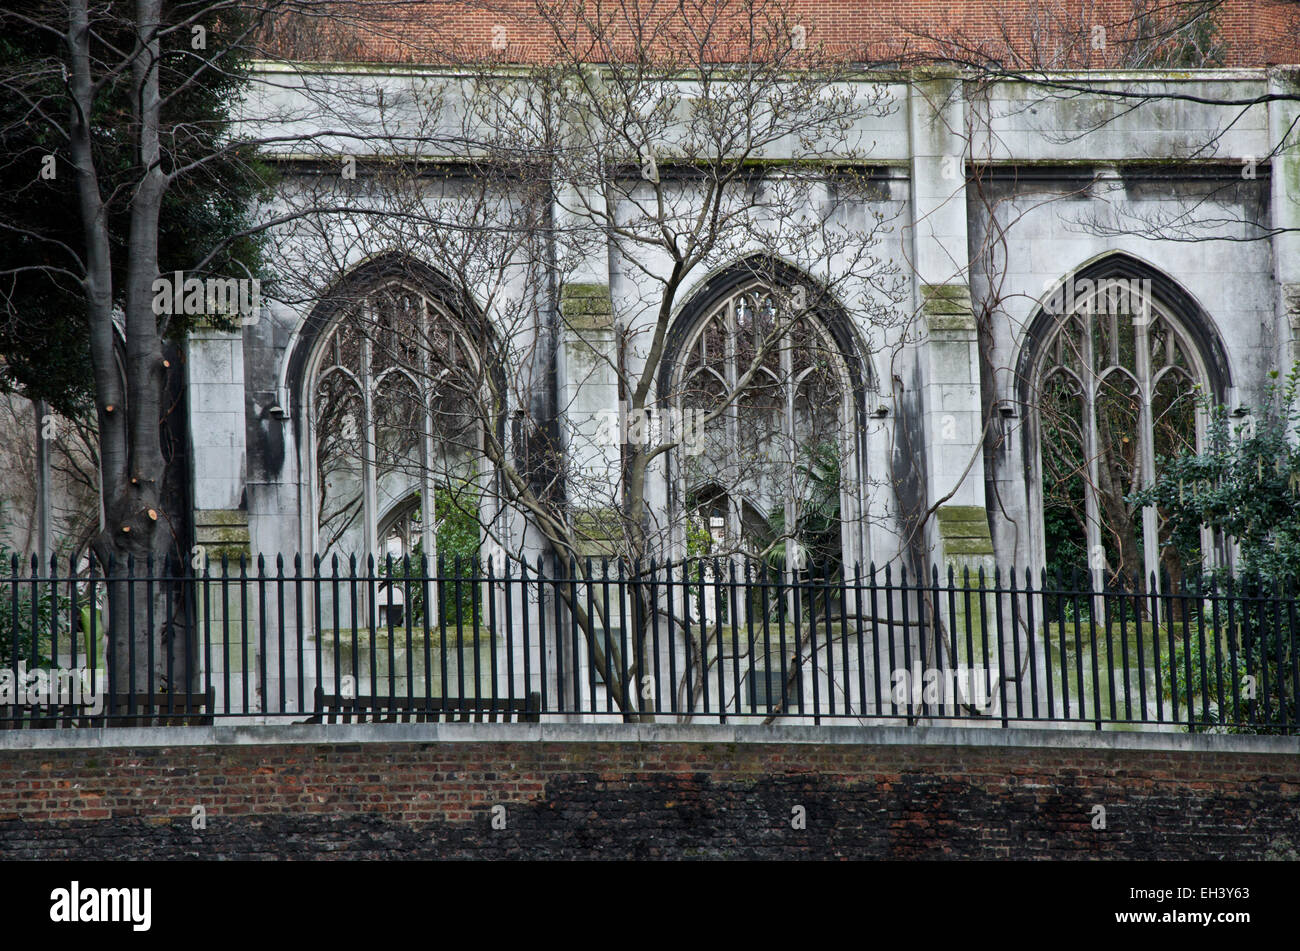 The ruins of St Dunstan in the East church in London. Stock Photo